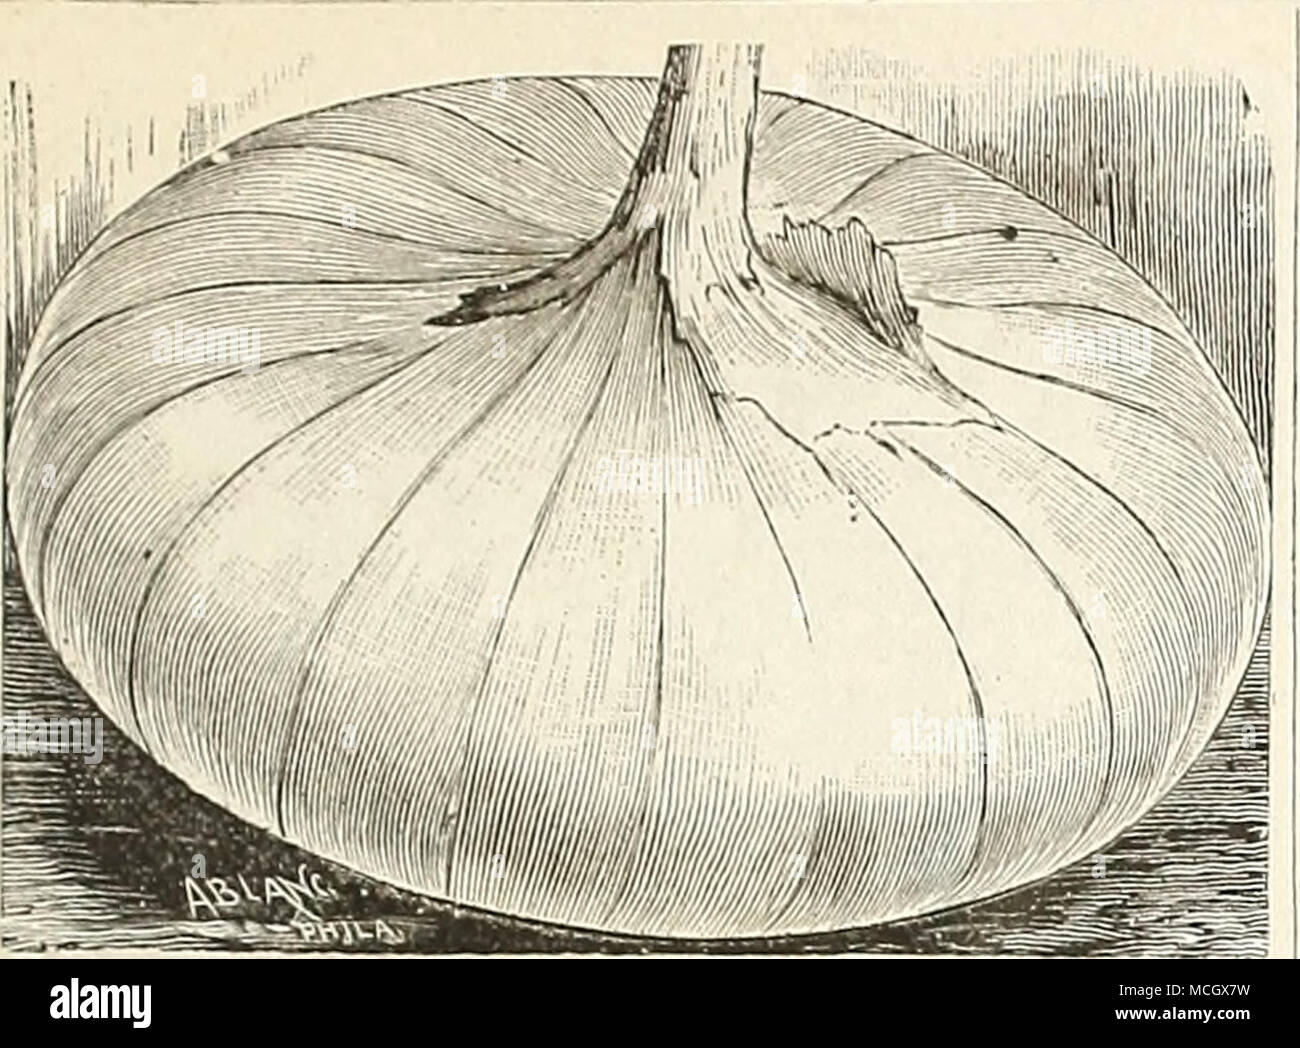 . MAMMOTH SILVER KING. This is the largest of the wliite Italian Onions, and attains an enormous size in one season from seed. This sort is deserving of extensive cultivation, and will be found especially serviceable in the family garden, as it is of mild flavor, attractive appearance and form, and a good keeper. Pkt. 10 cts., oz. 30 ets.,  lb. SI.00, lb. $3.00. Stock Photo